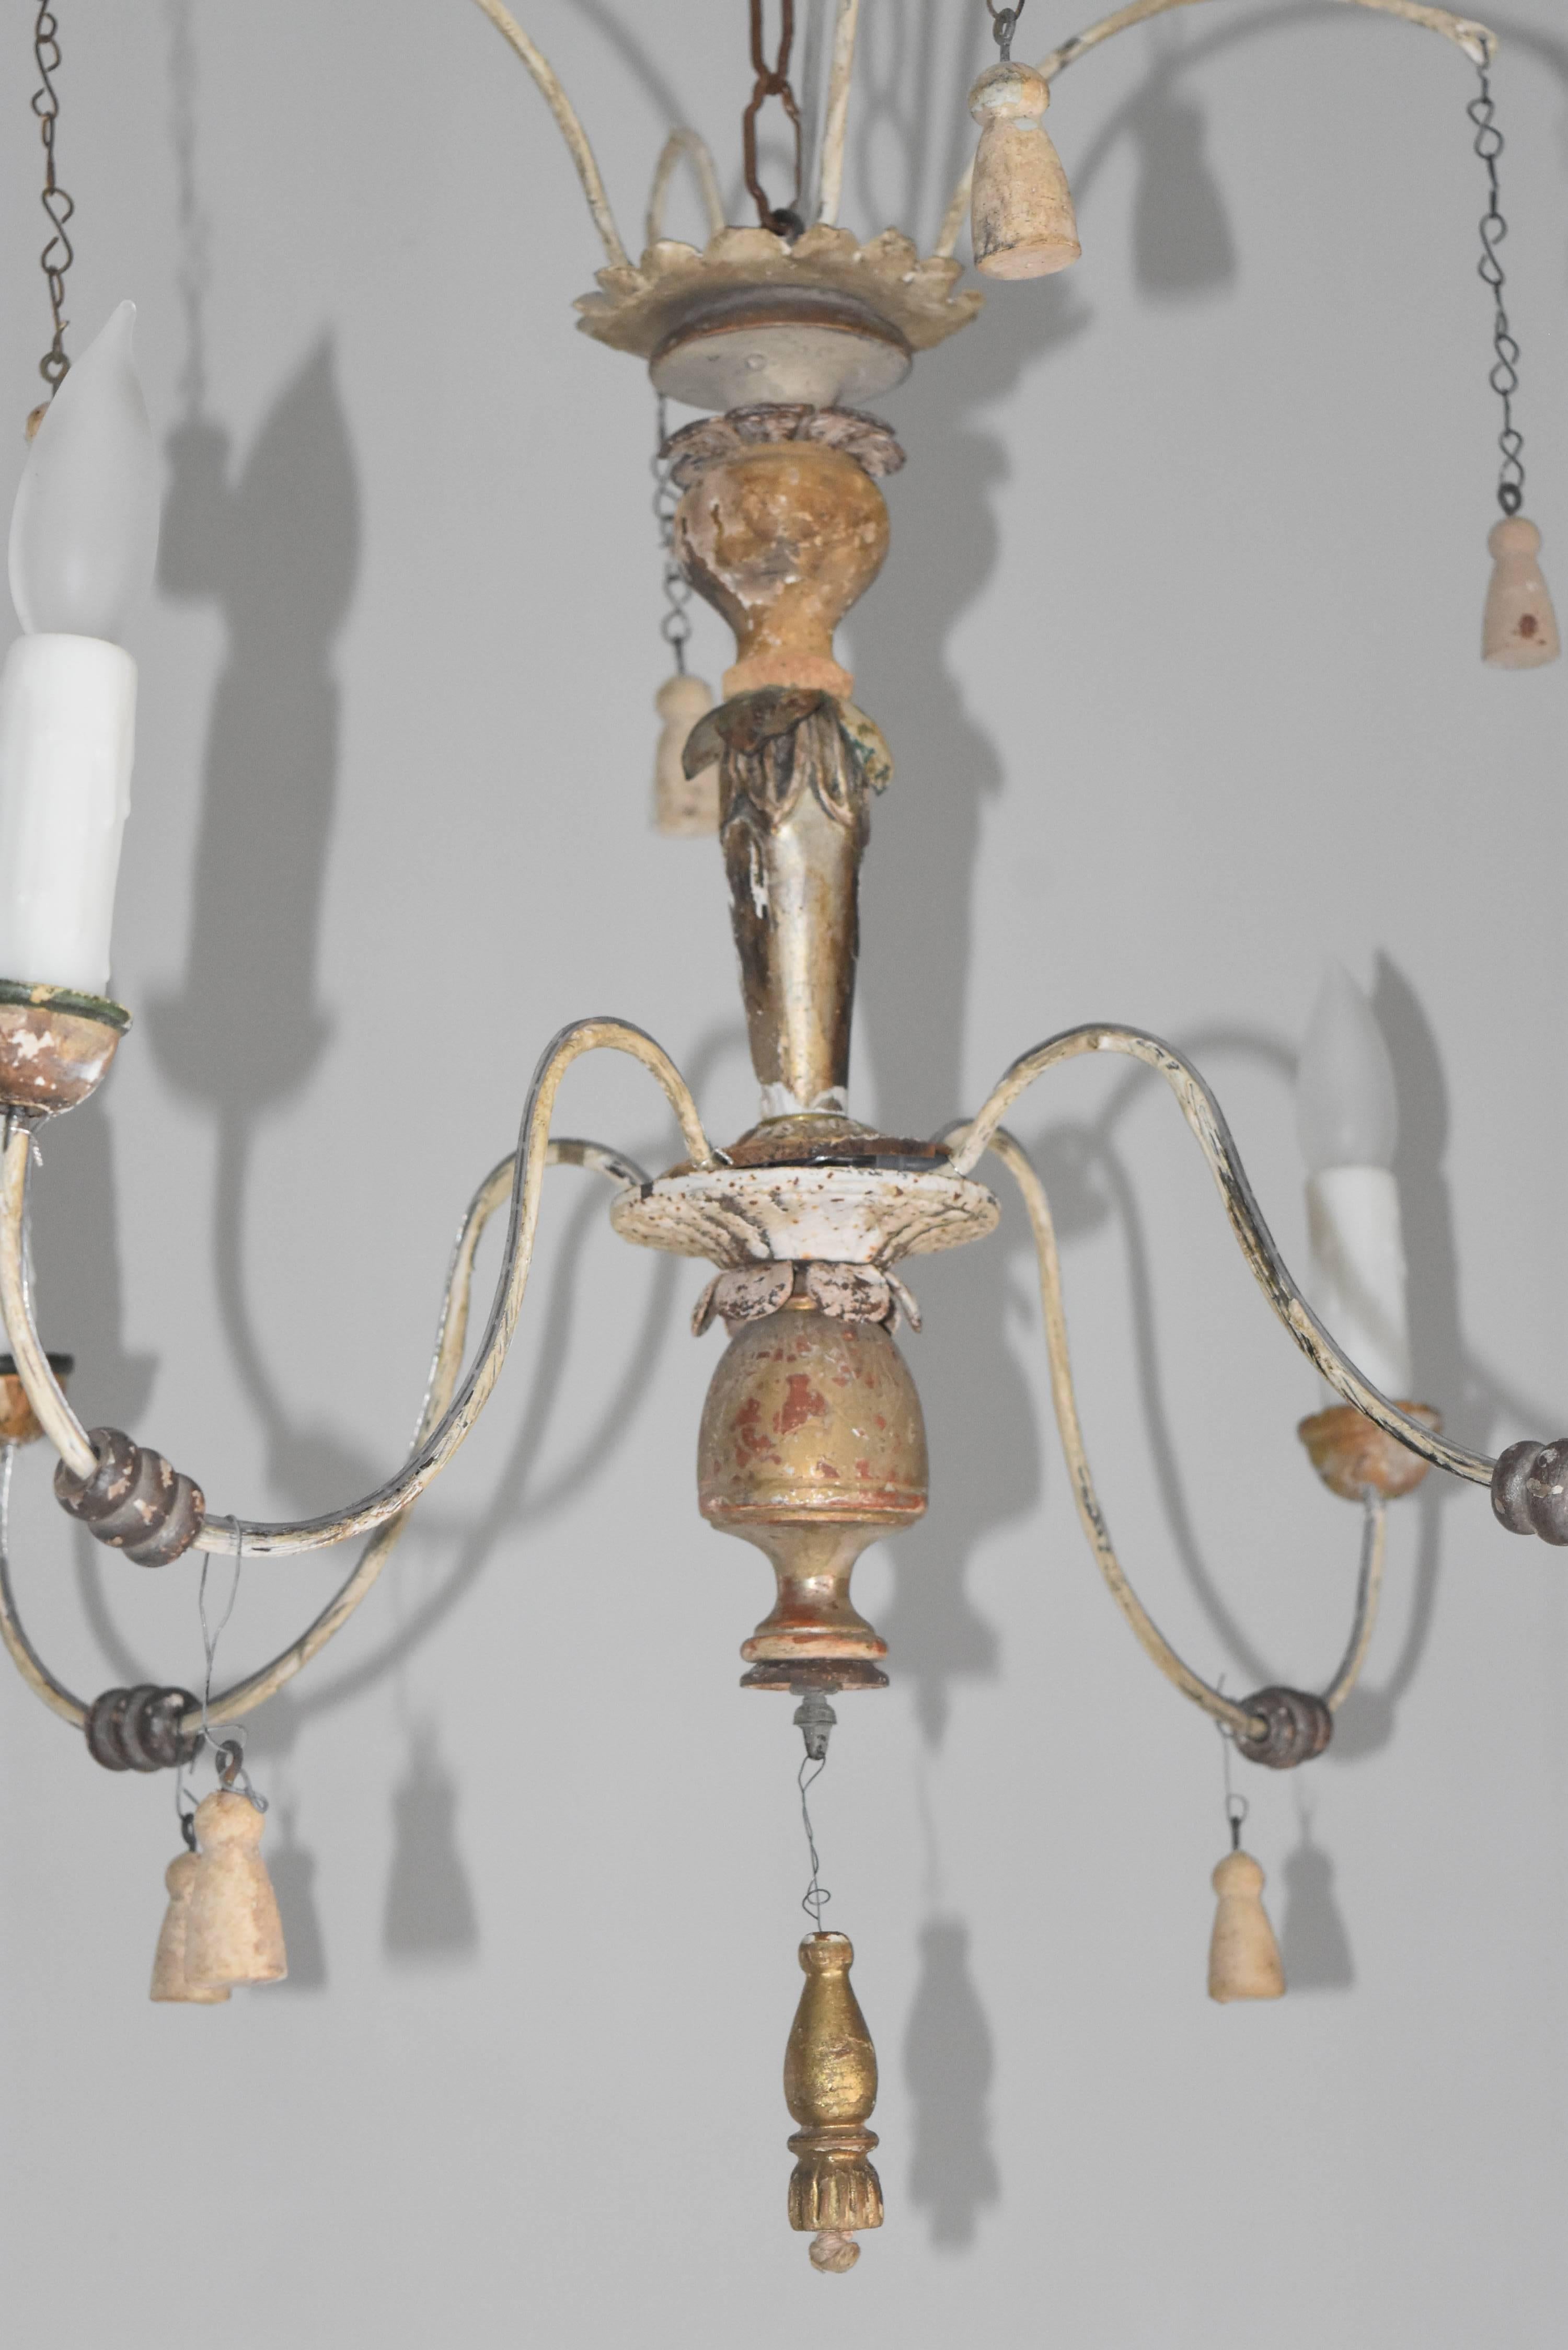 This is a whimsical, one of a kind, hand made wood and metal chandelier that has been made from 18th, 19th Century altar elements .  It's that perfect little something for that special powder room or anywhere you need a airy four-light chandelier.